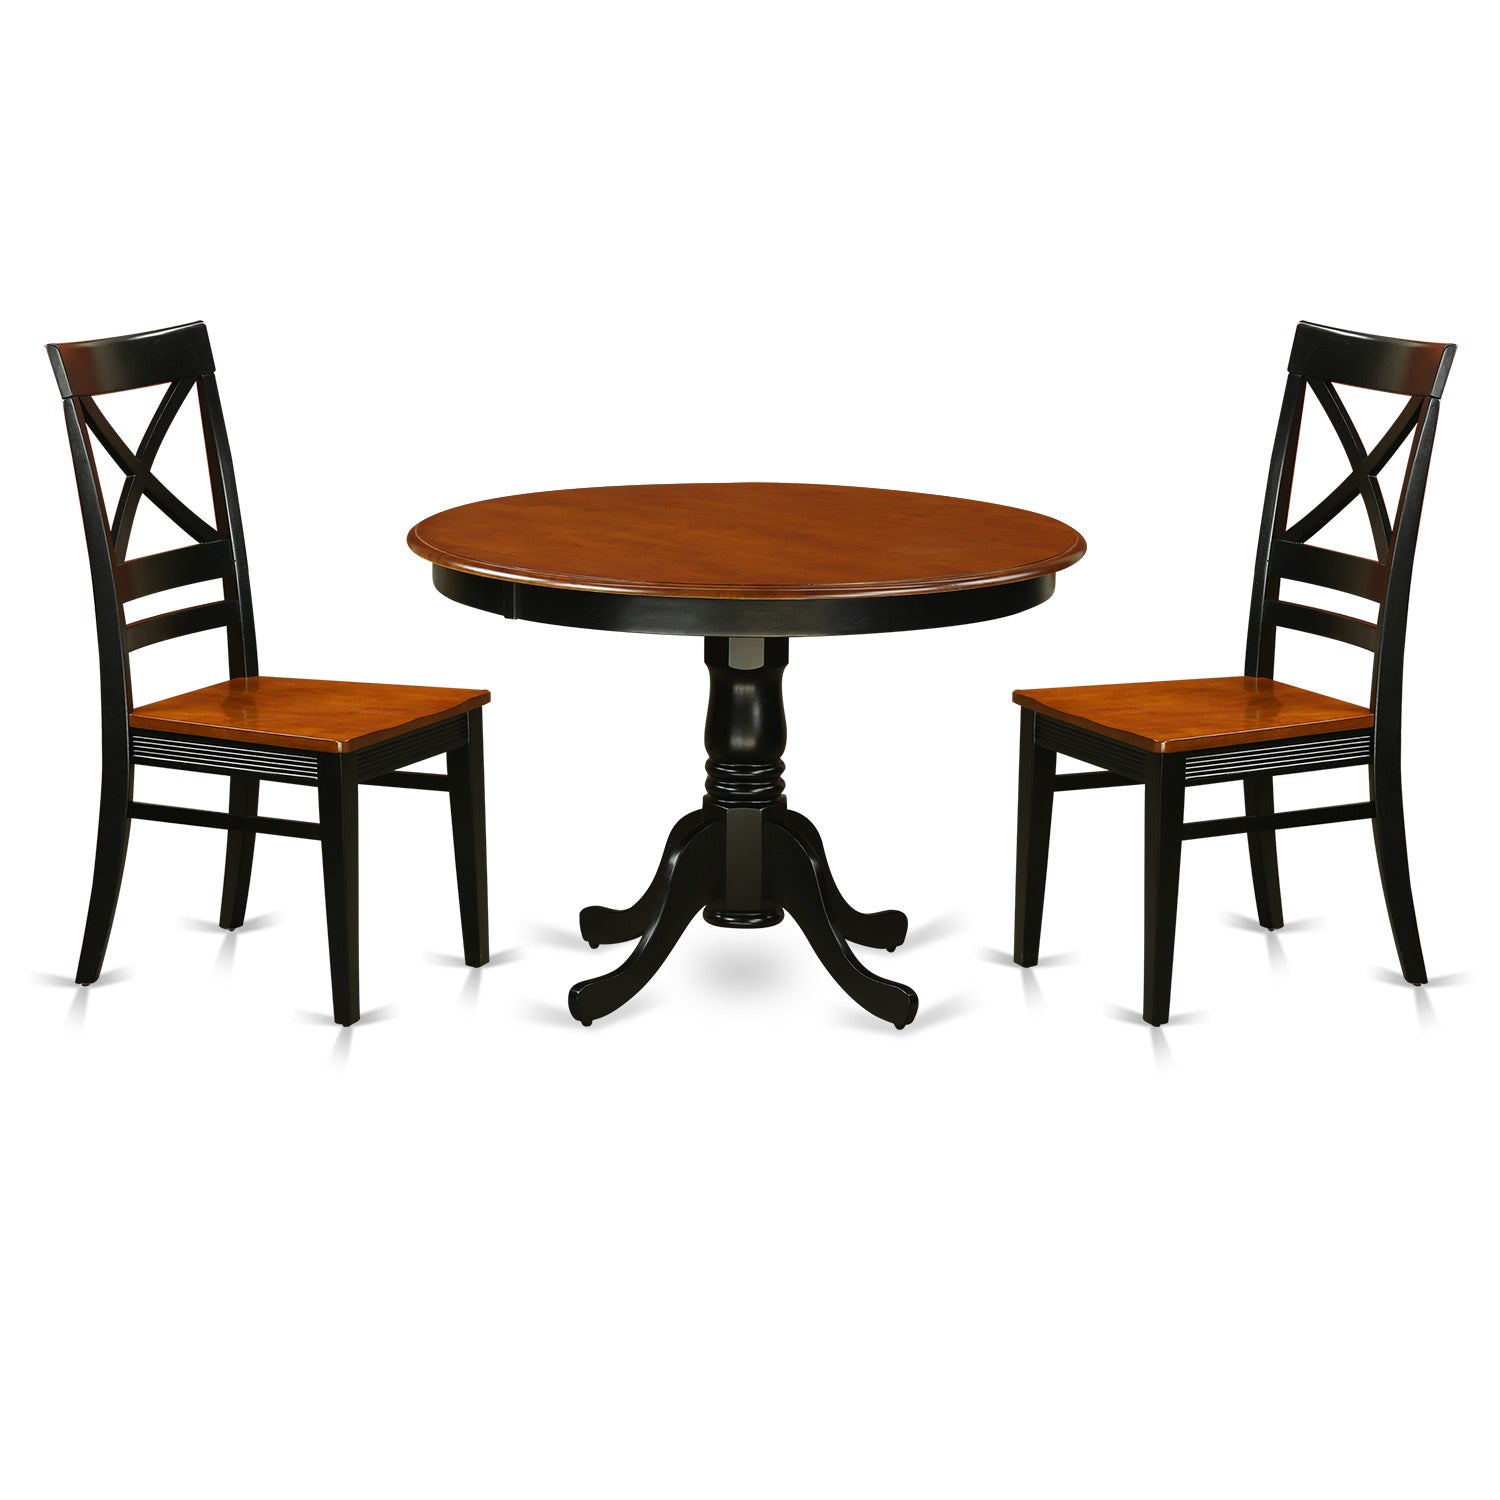 HLQU3-BCH-W 3 Pc set with a Round Dinette Table and 2 Leather Kitchen Chairs in Black and Cherry